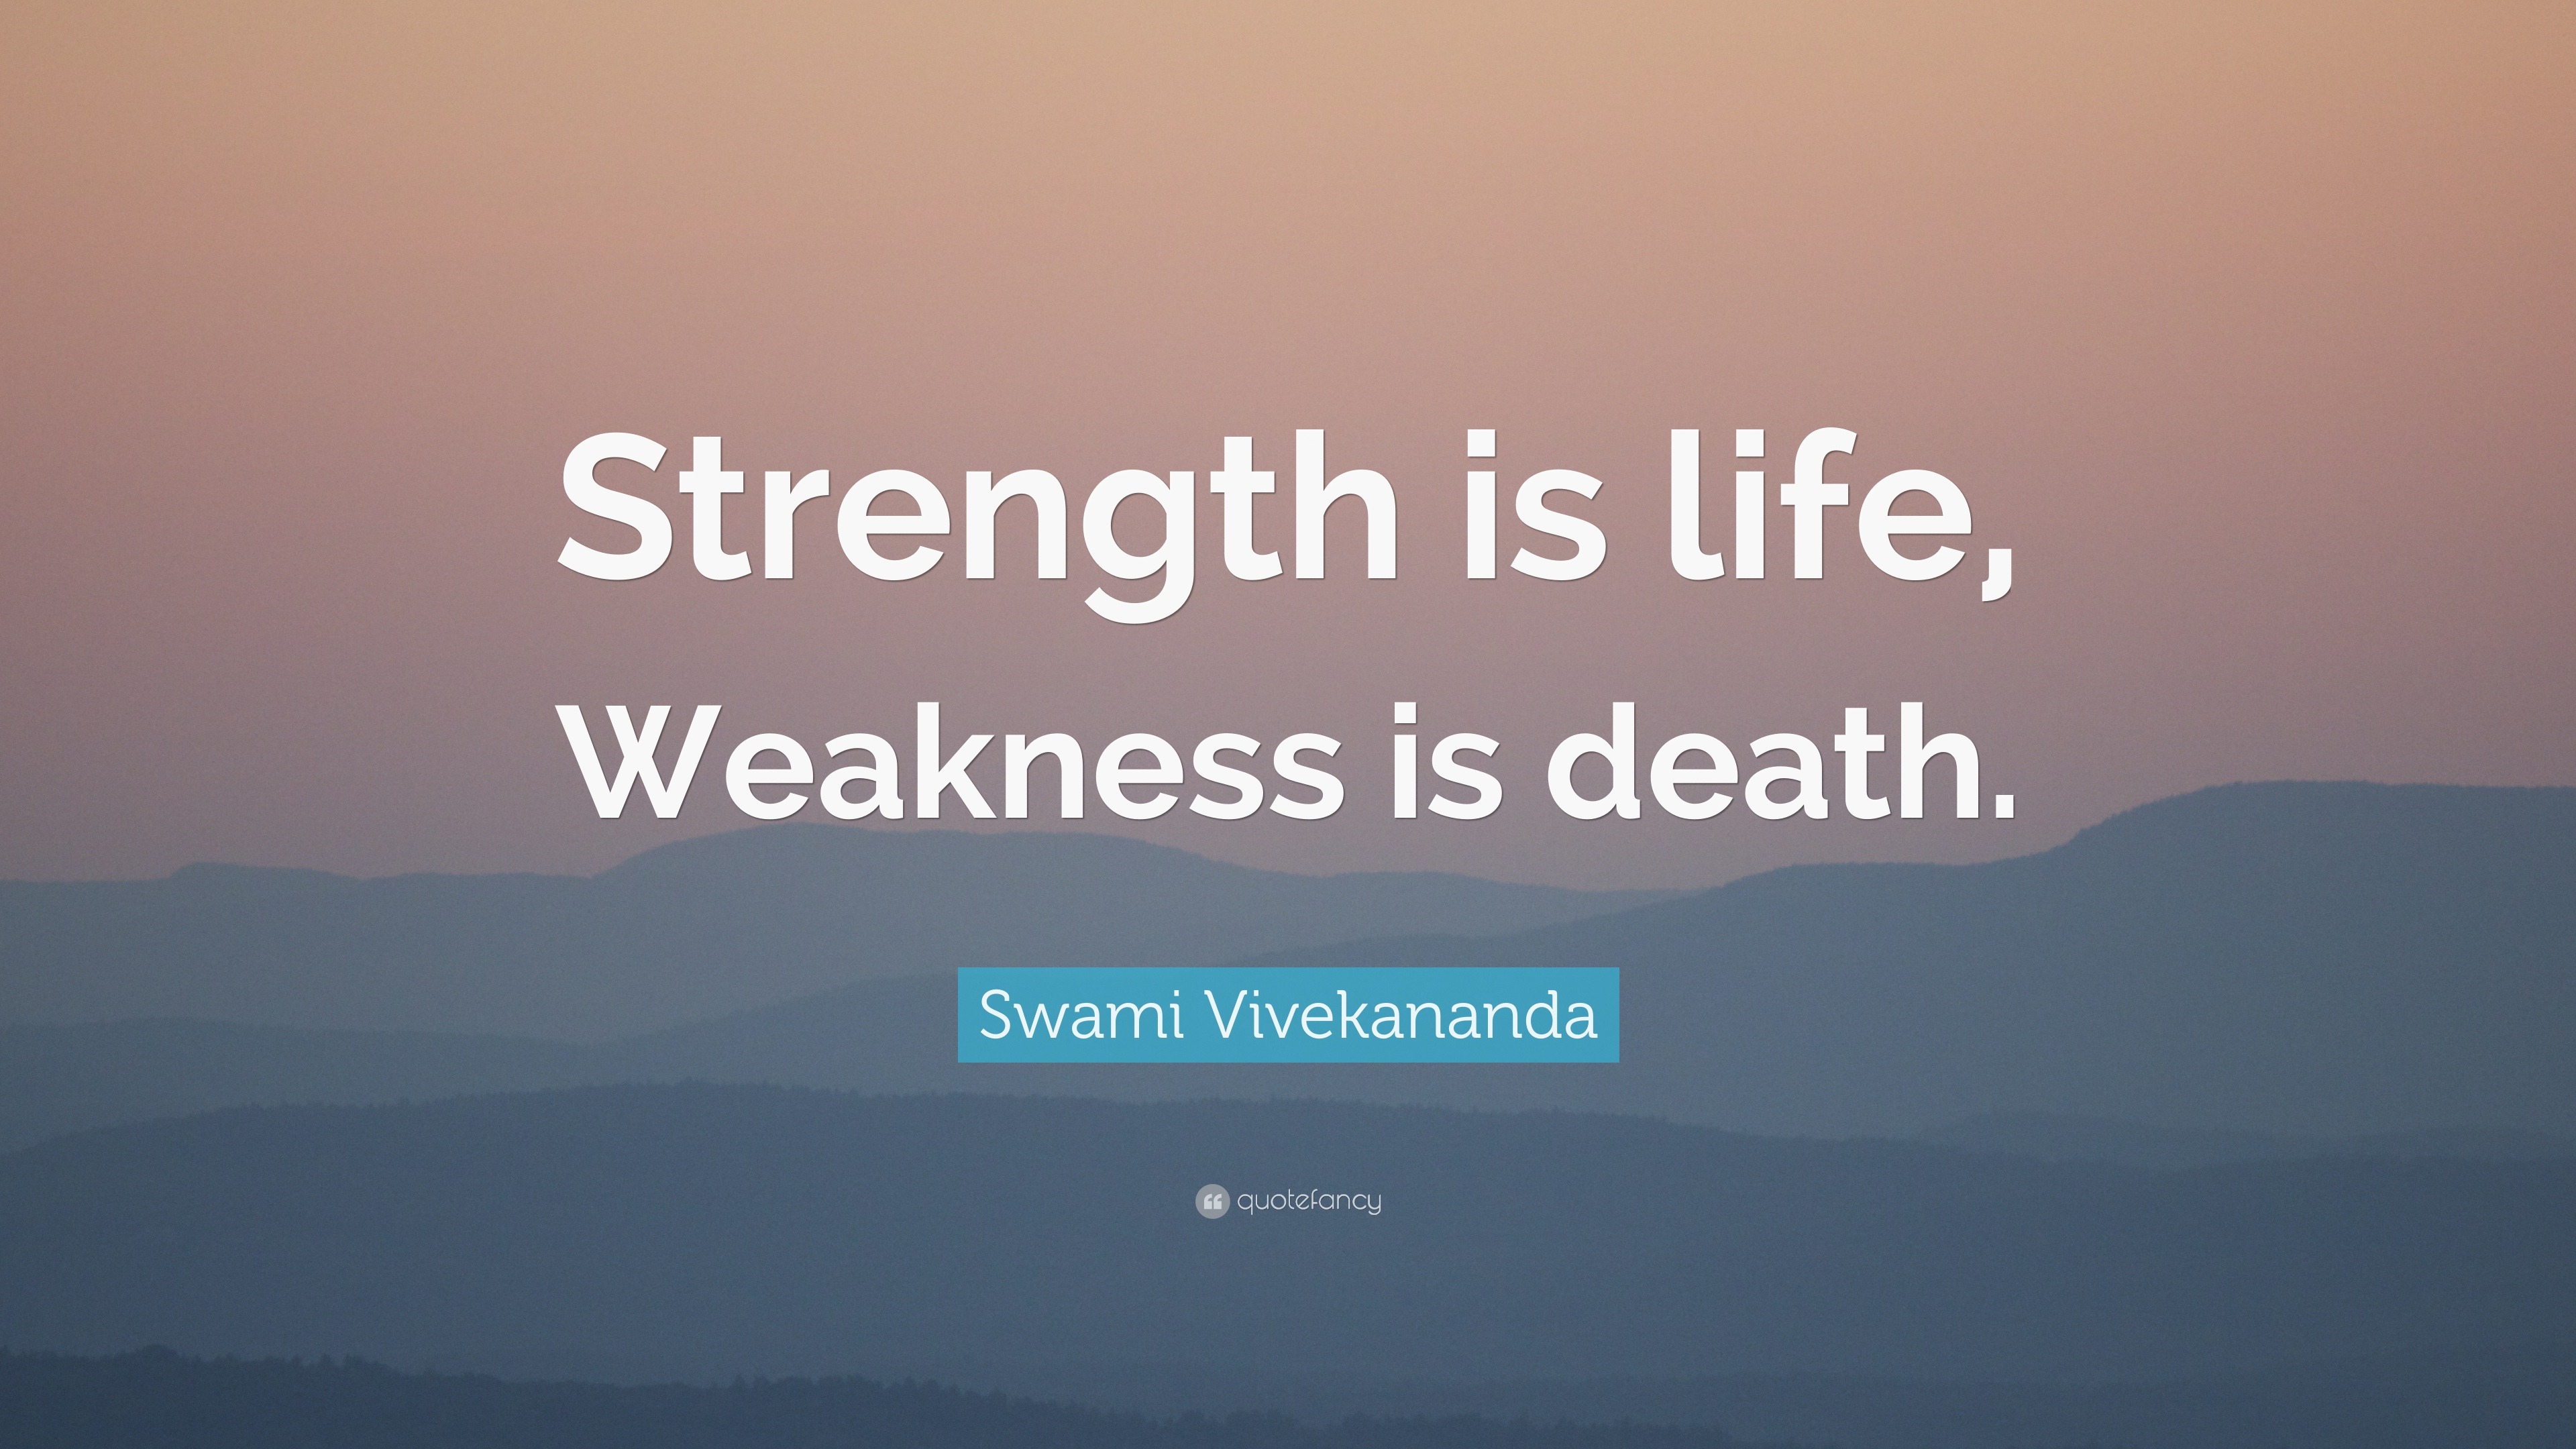 Swami Vivekananda Quote “Strength is life Weakness is ”